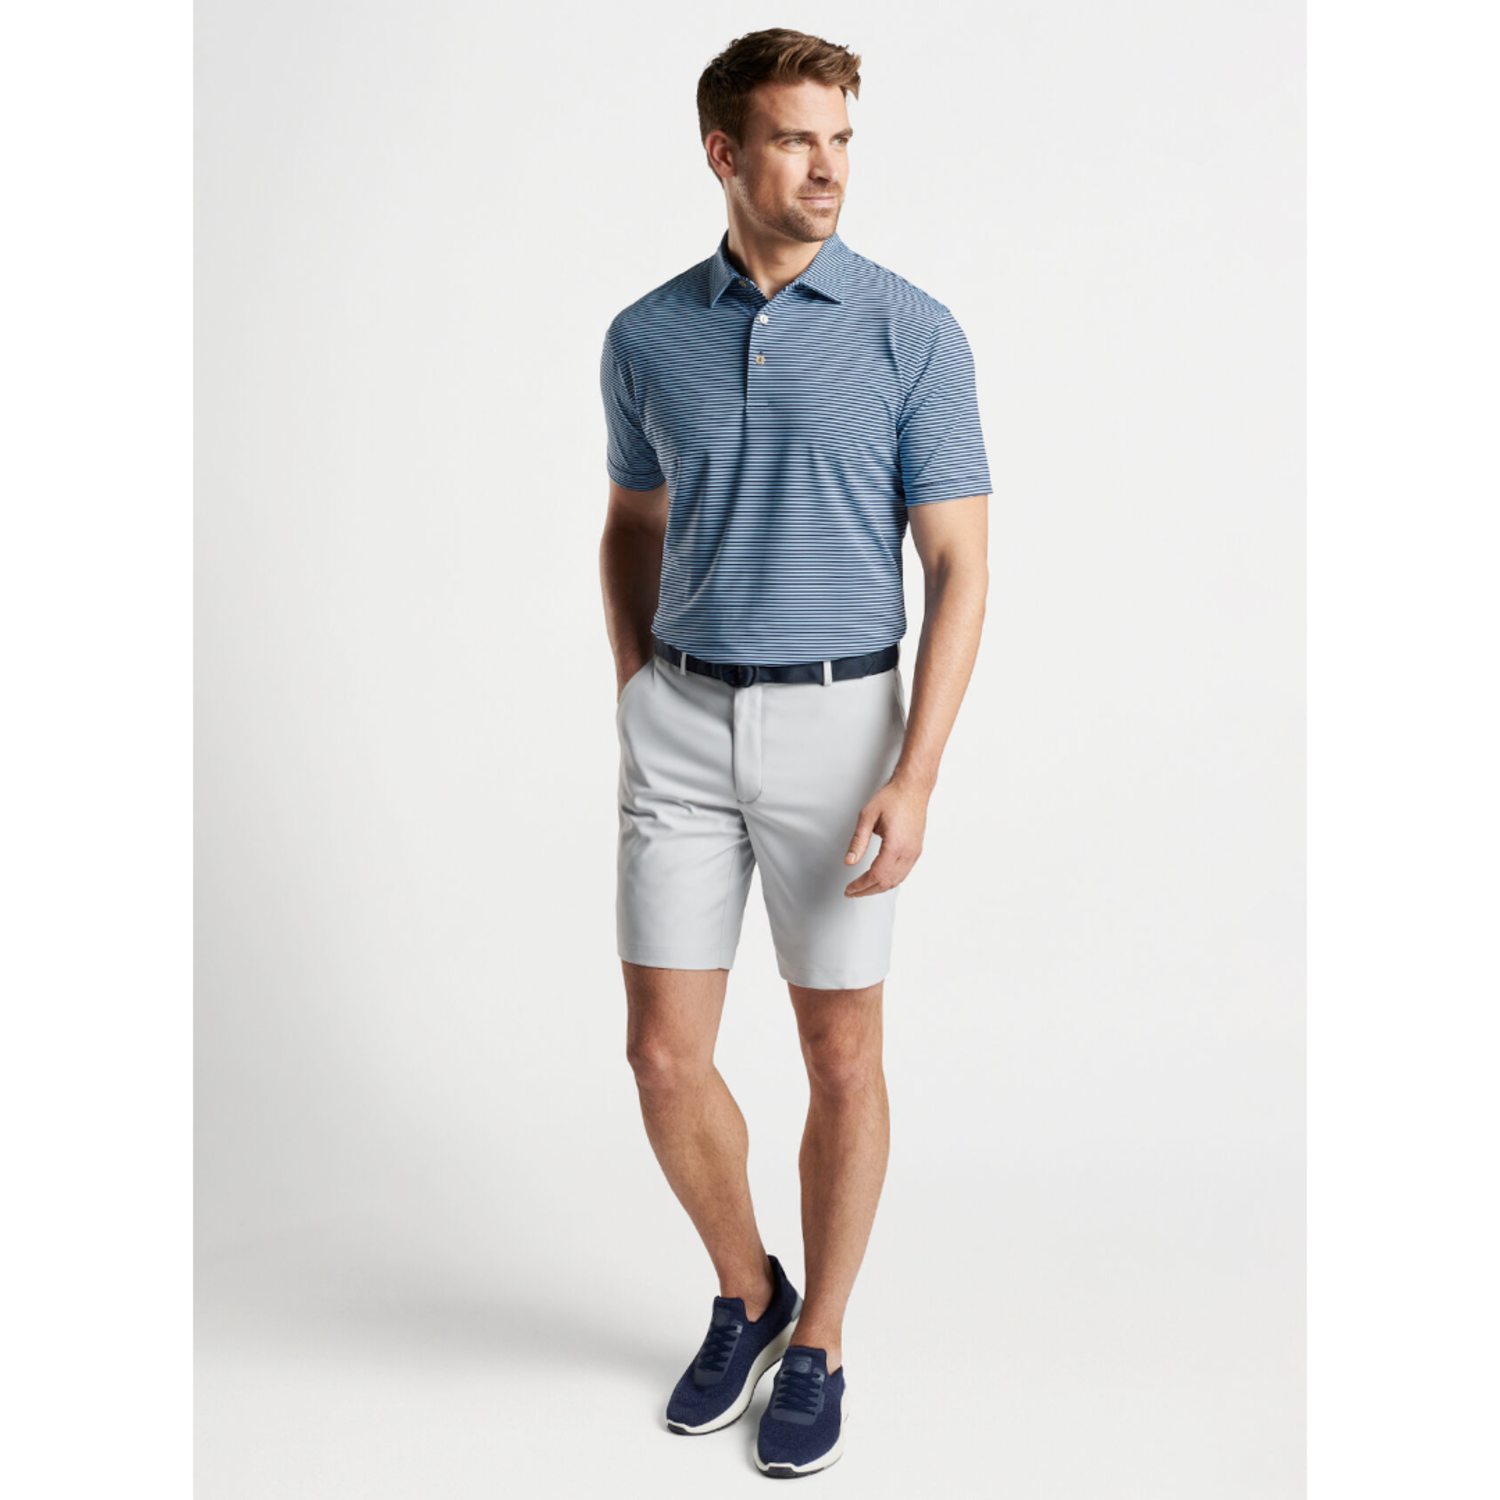 Peter Millar Hales Performance Jersey Polo - CK Collection Men